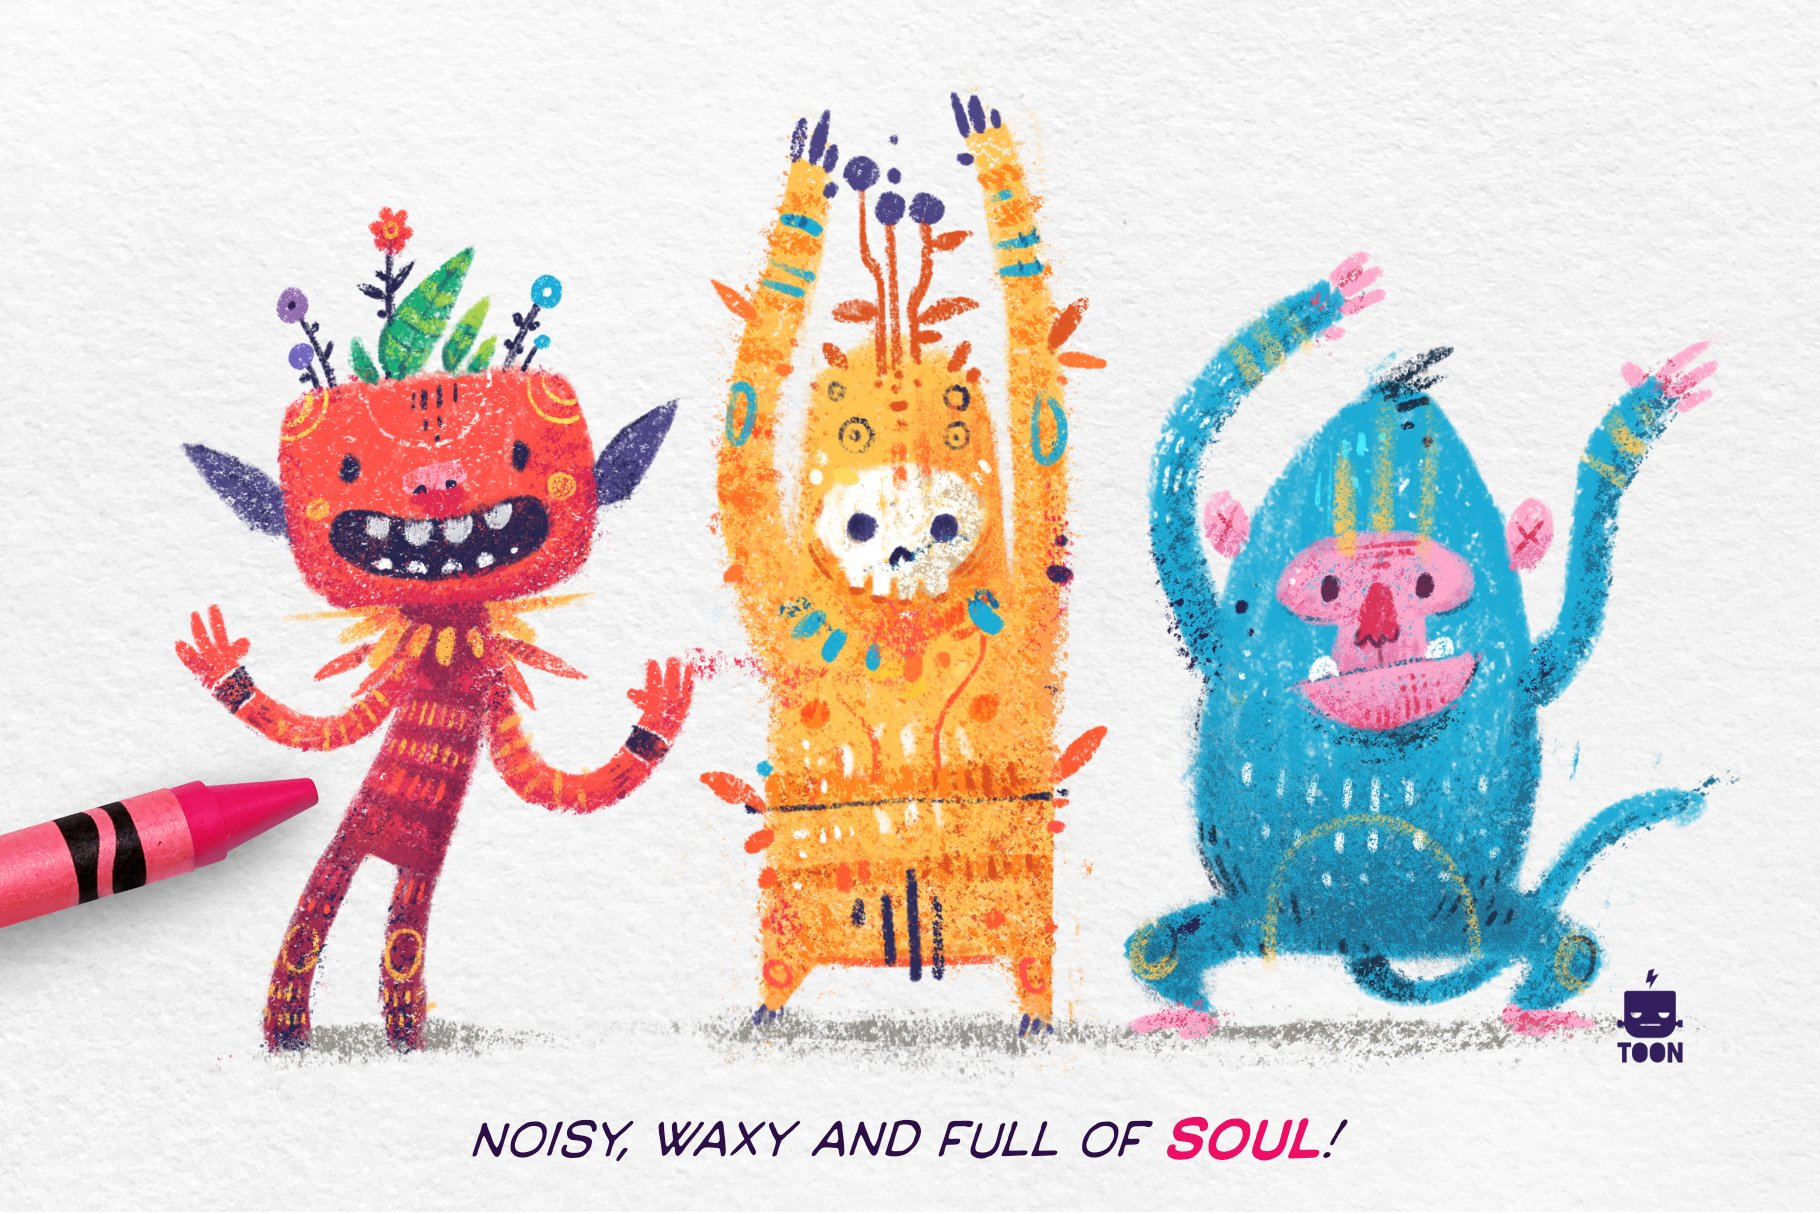 So funny and multicolor monsters by crayon.